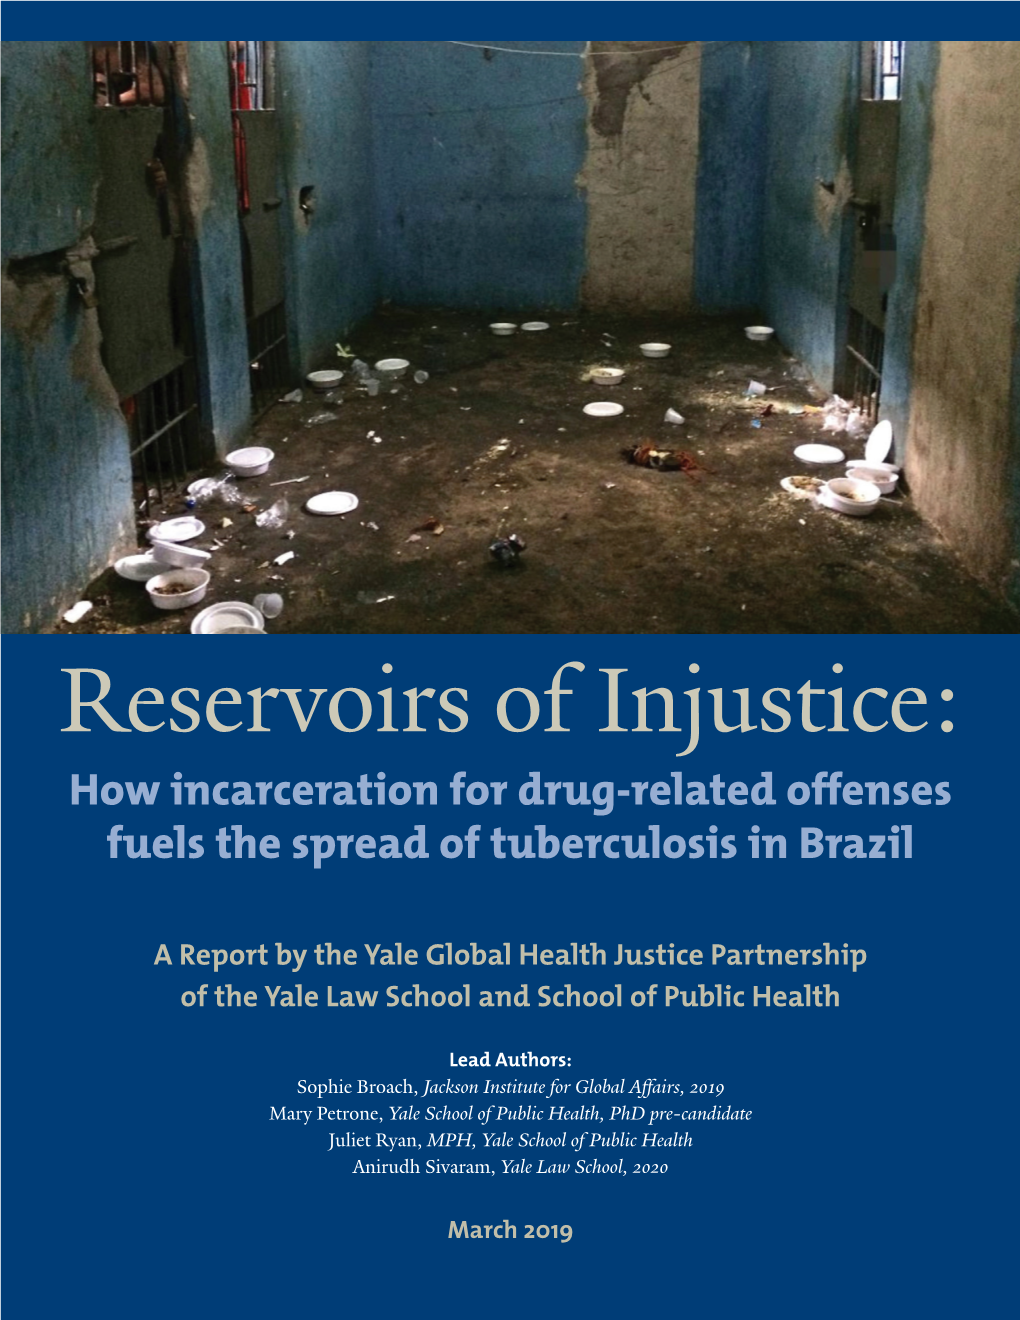 Reservoirs of Injustice: How Incarceration for Drug-Related Offenses Fuels the Spread of Tuberculosis in Brazil